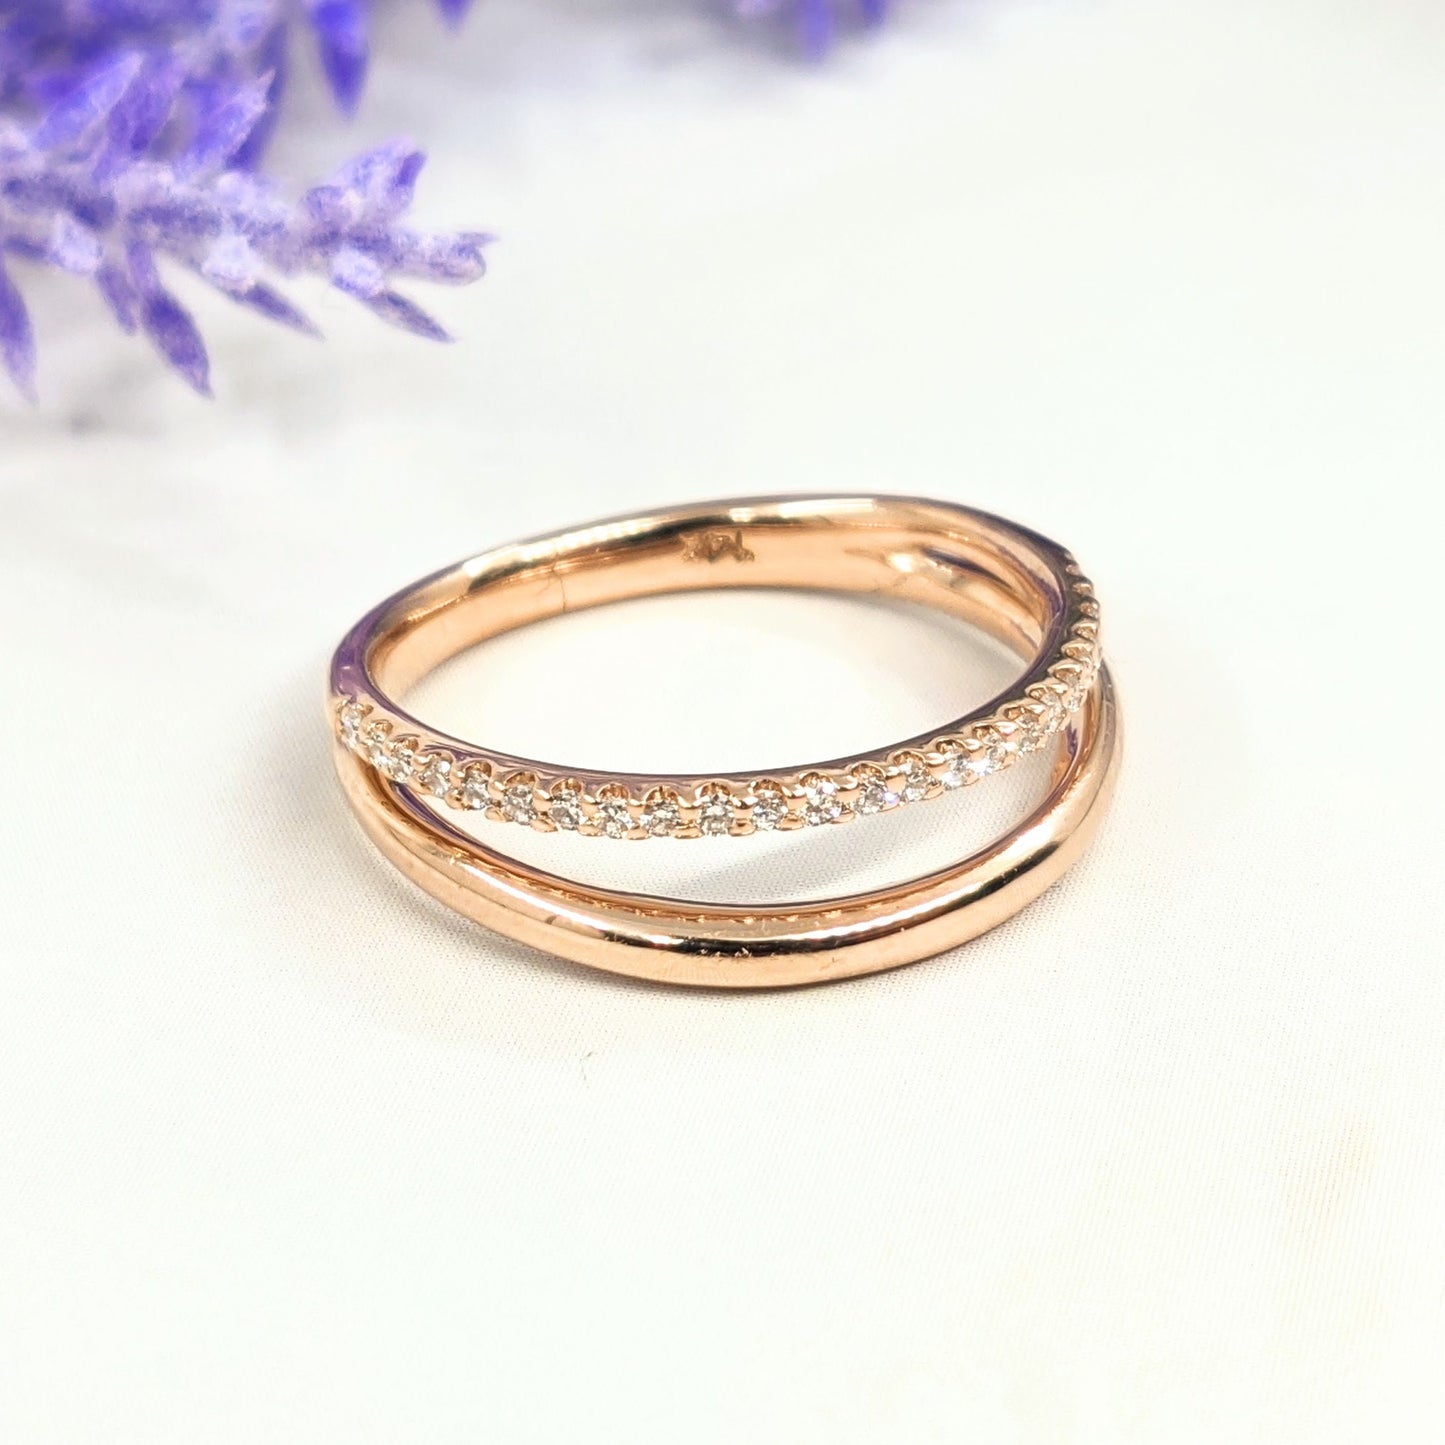 Double Stacking Ring/Double Band  100% Natural Diamond Ring/14K Solid Gold Unique Diamond Ring/Anniversary Gift/ Unique Gold Diamond Ring